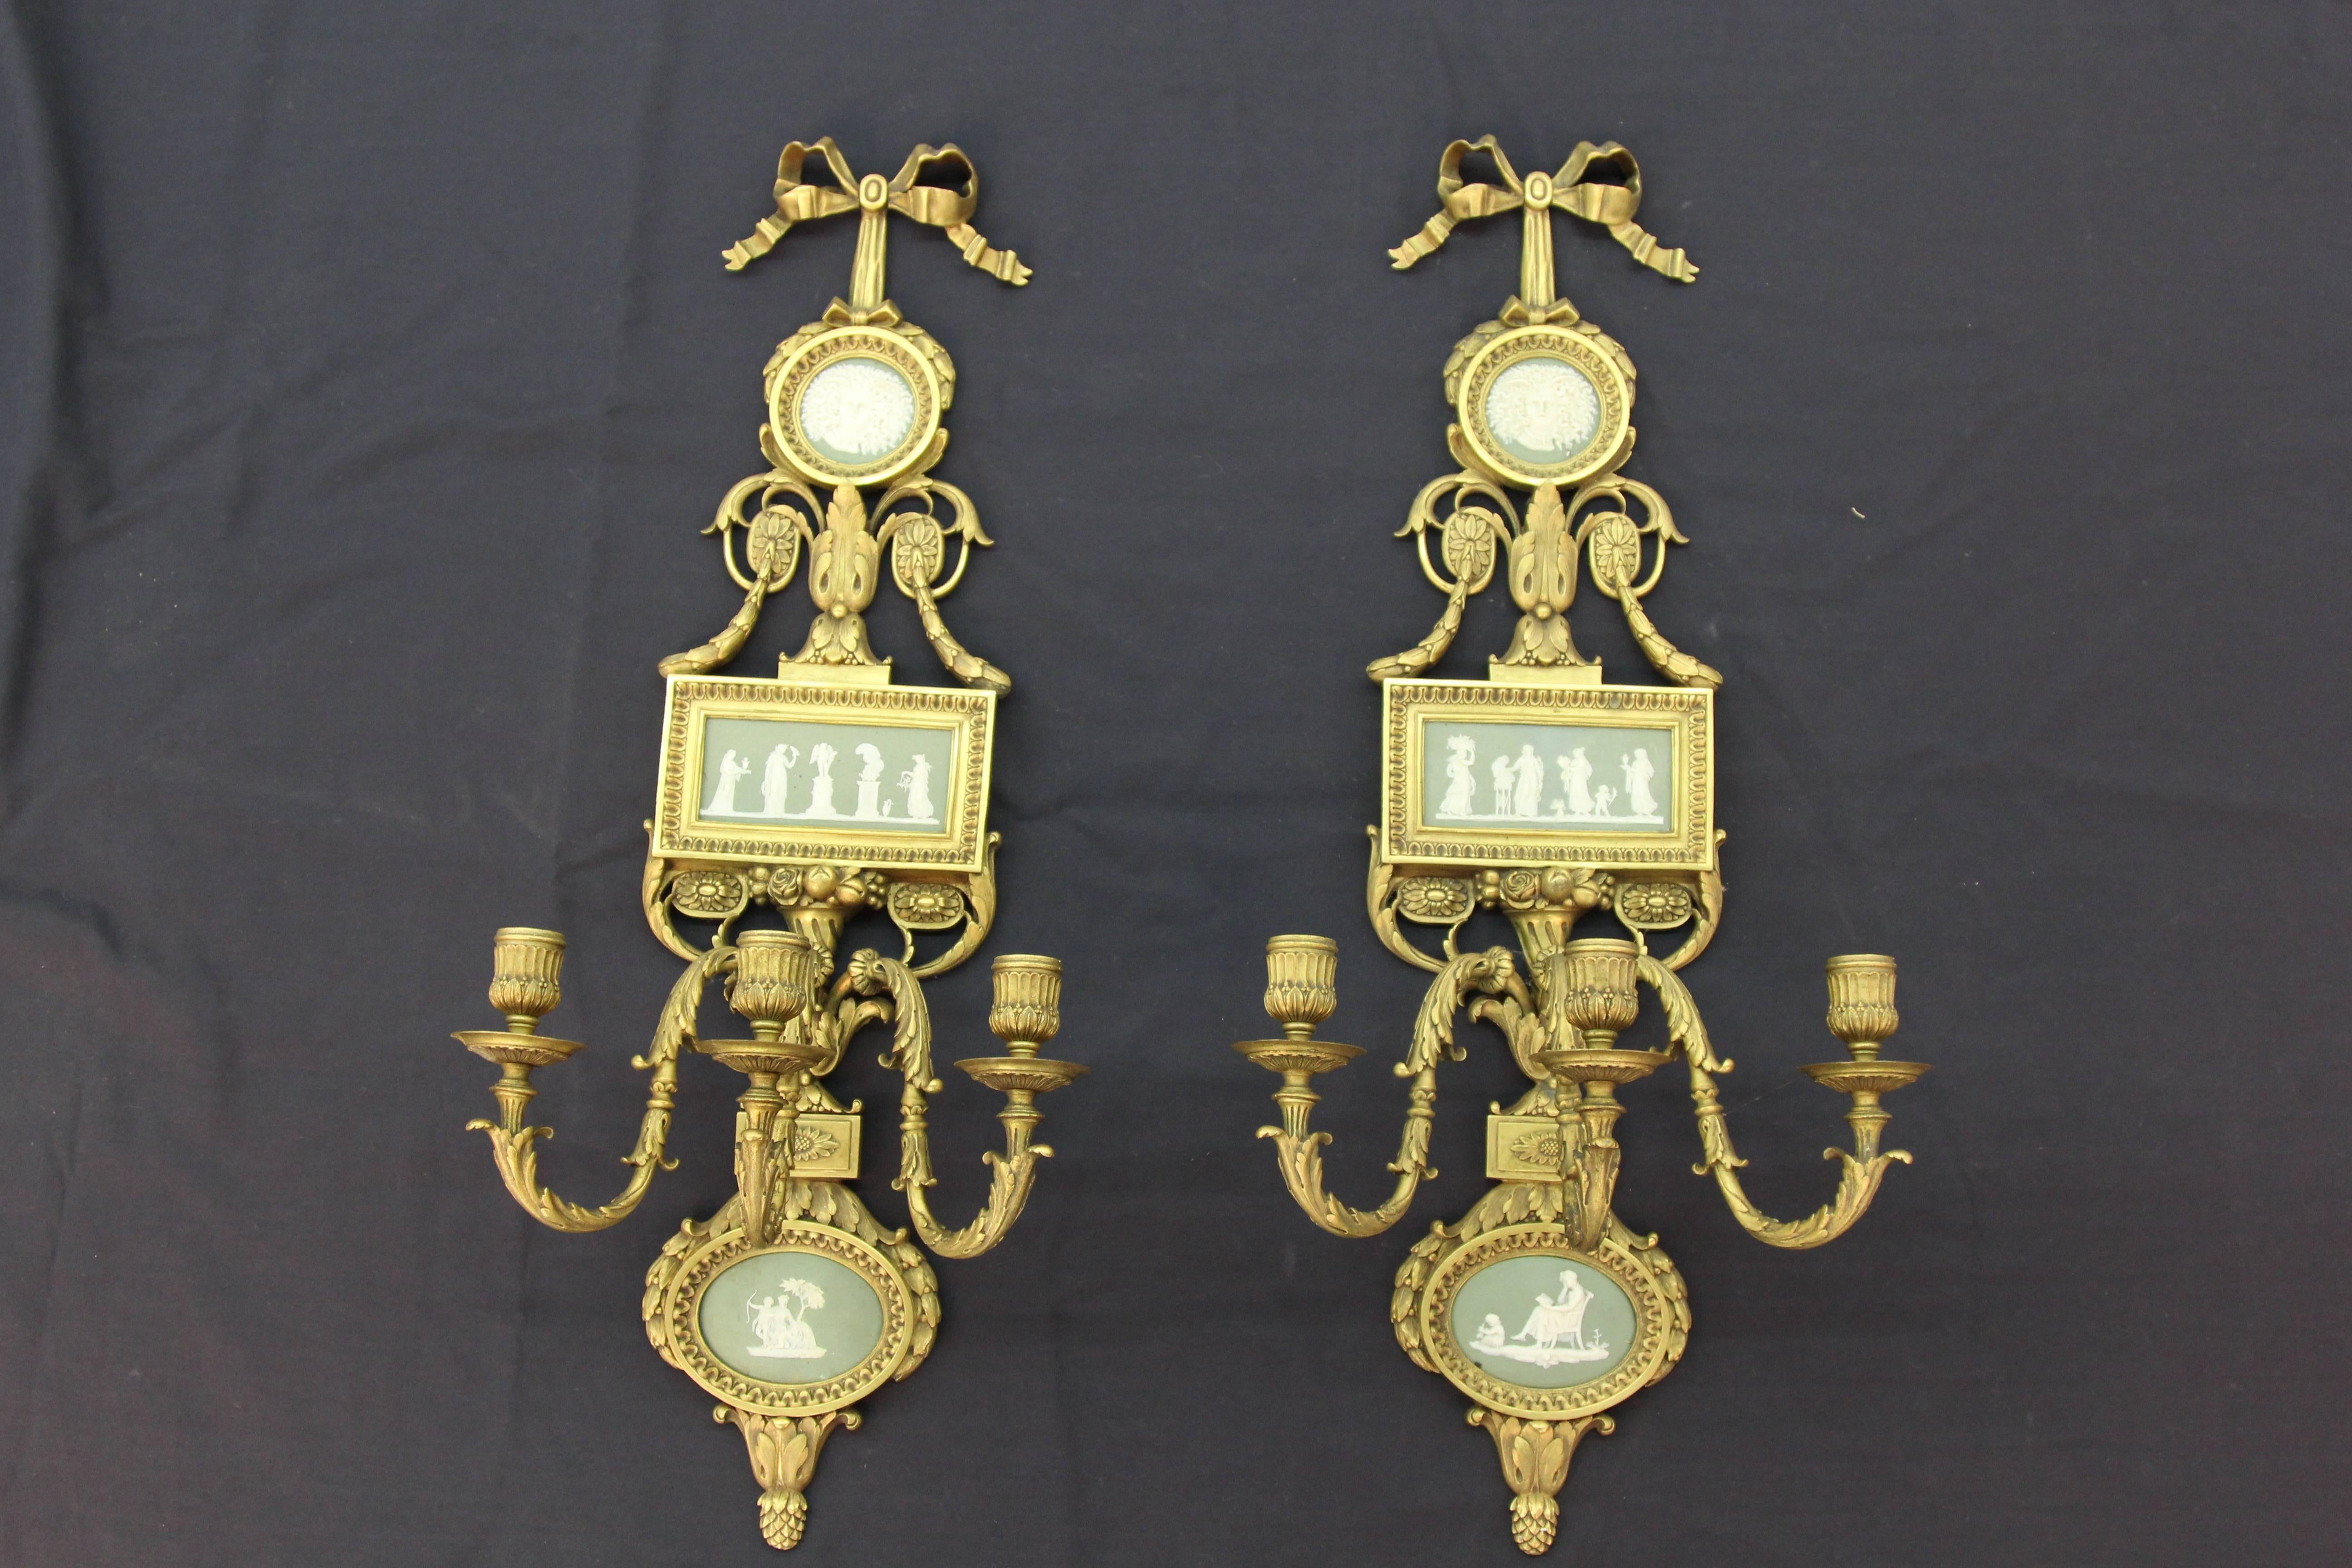 Palace size E.F. Caldwell green wedgwood doré gilt bronze sconces circa 1900. A royal pair made in limited production for important clients at the turn of the century as well as landmark buildings such as 1600 Pennsylvania Ave. NW. Washington DC.